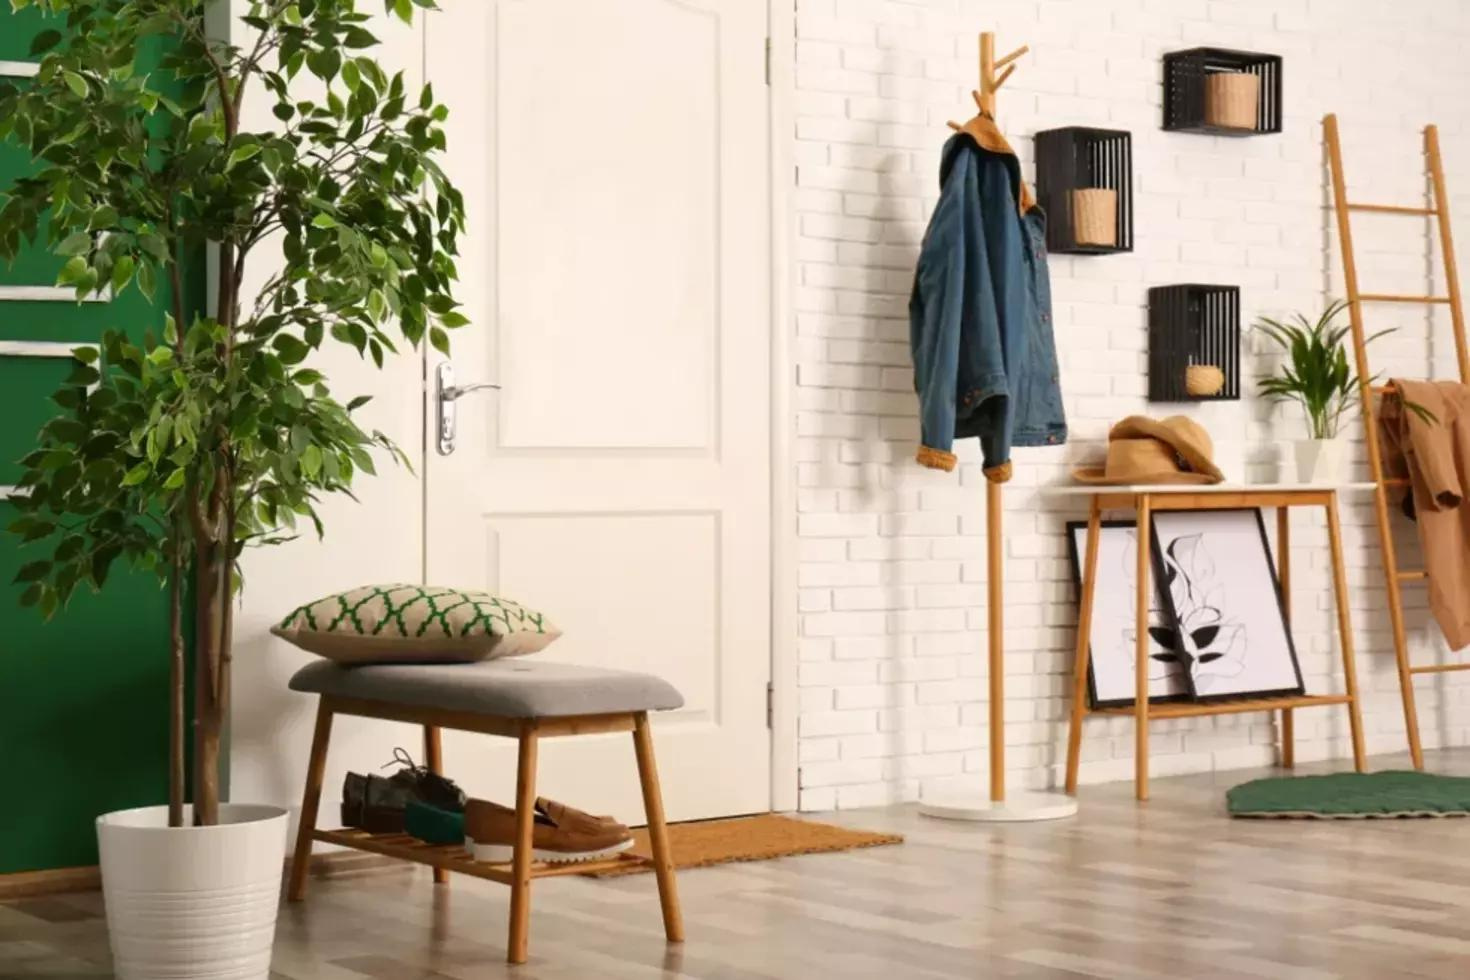 50 Small Apartment Storage Ideas That Won't Risk Your Deposit